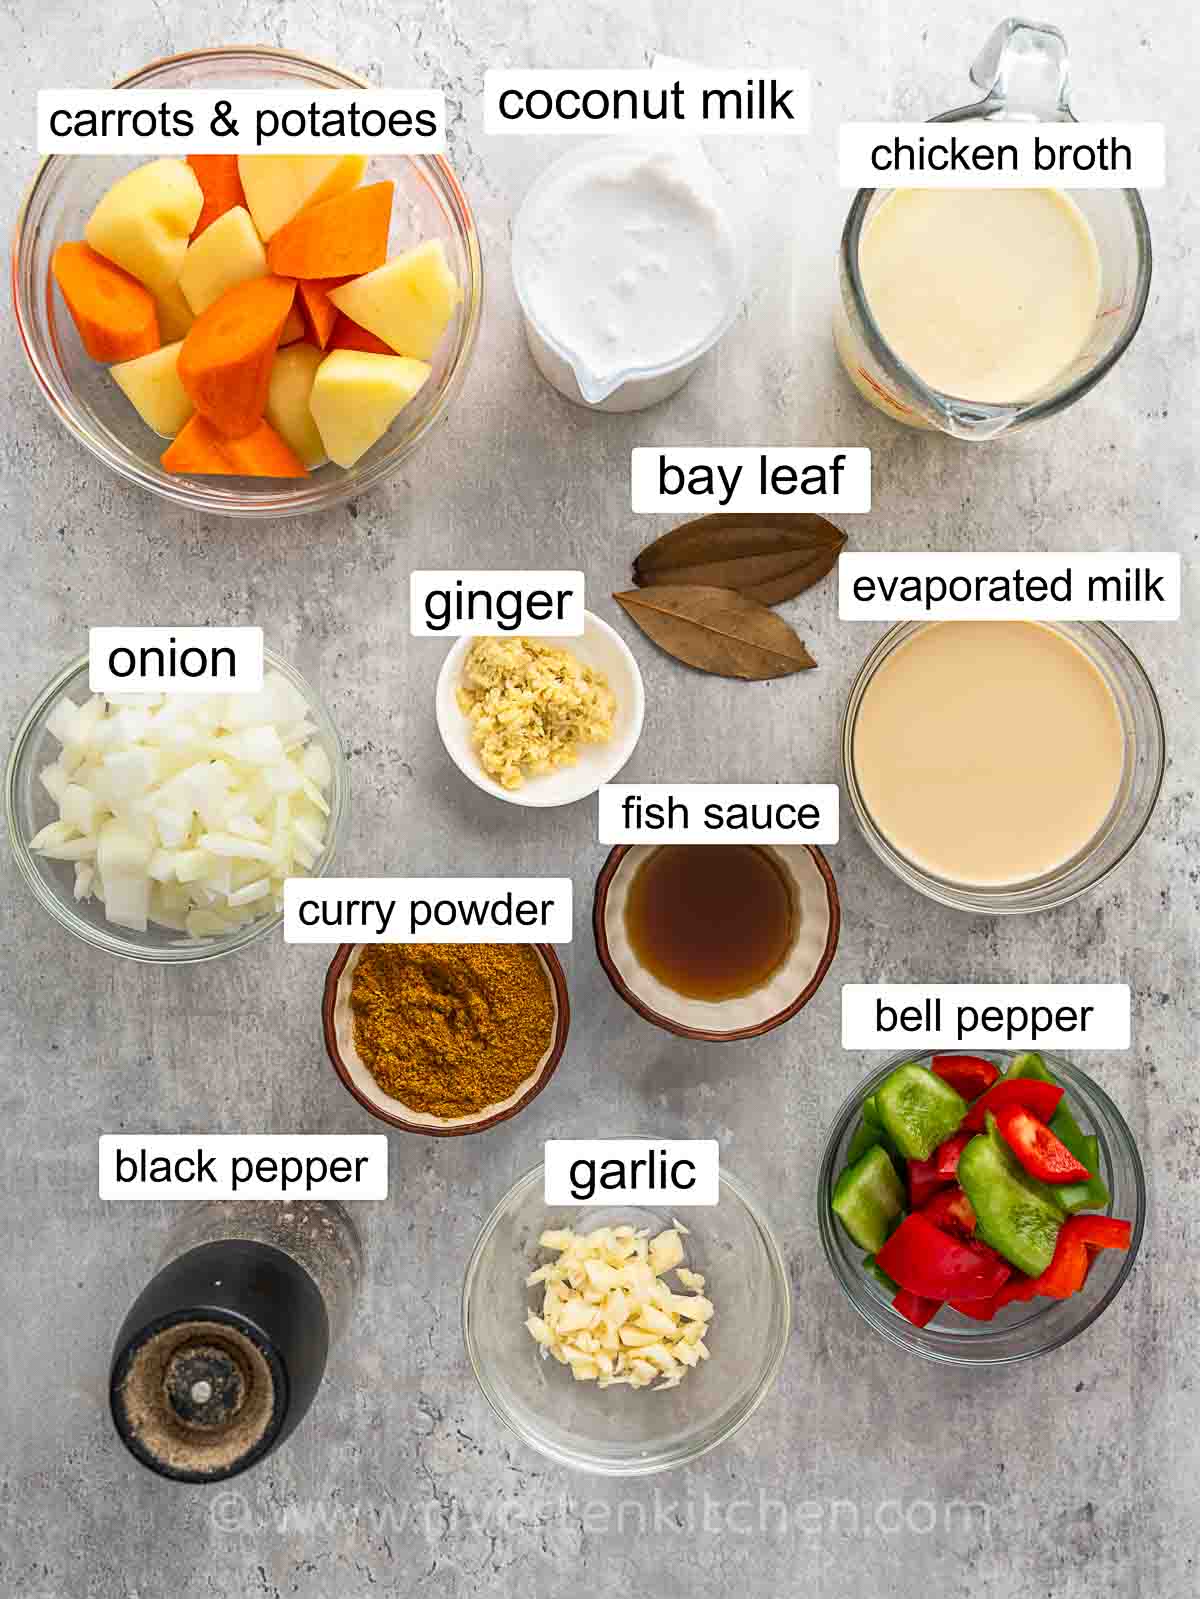 curry powder, coconut milk, evaporated milk, onion, ginger, garlic and bell pepper.